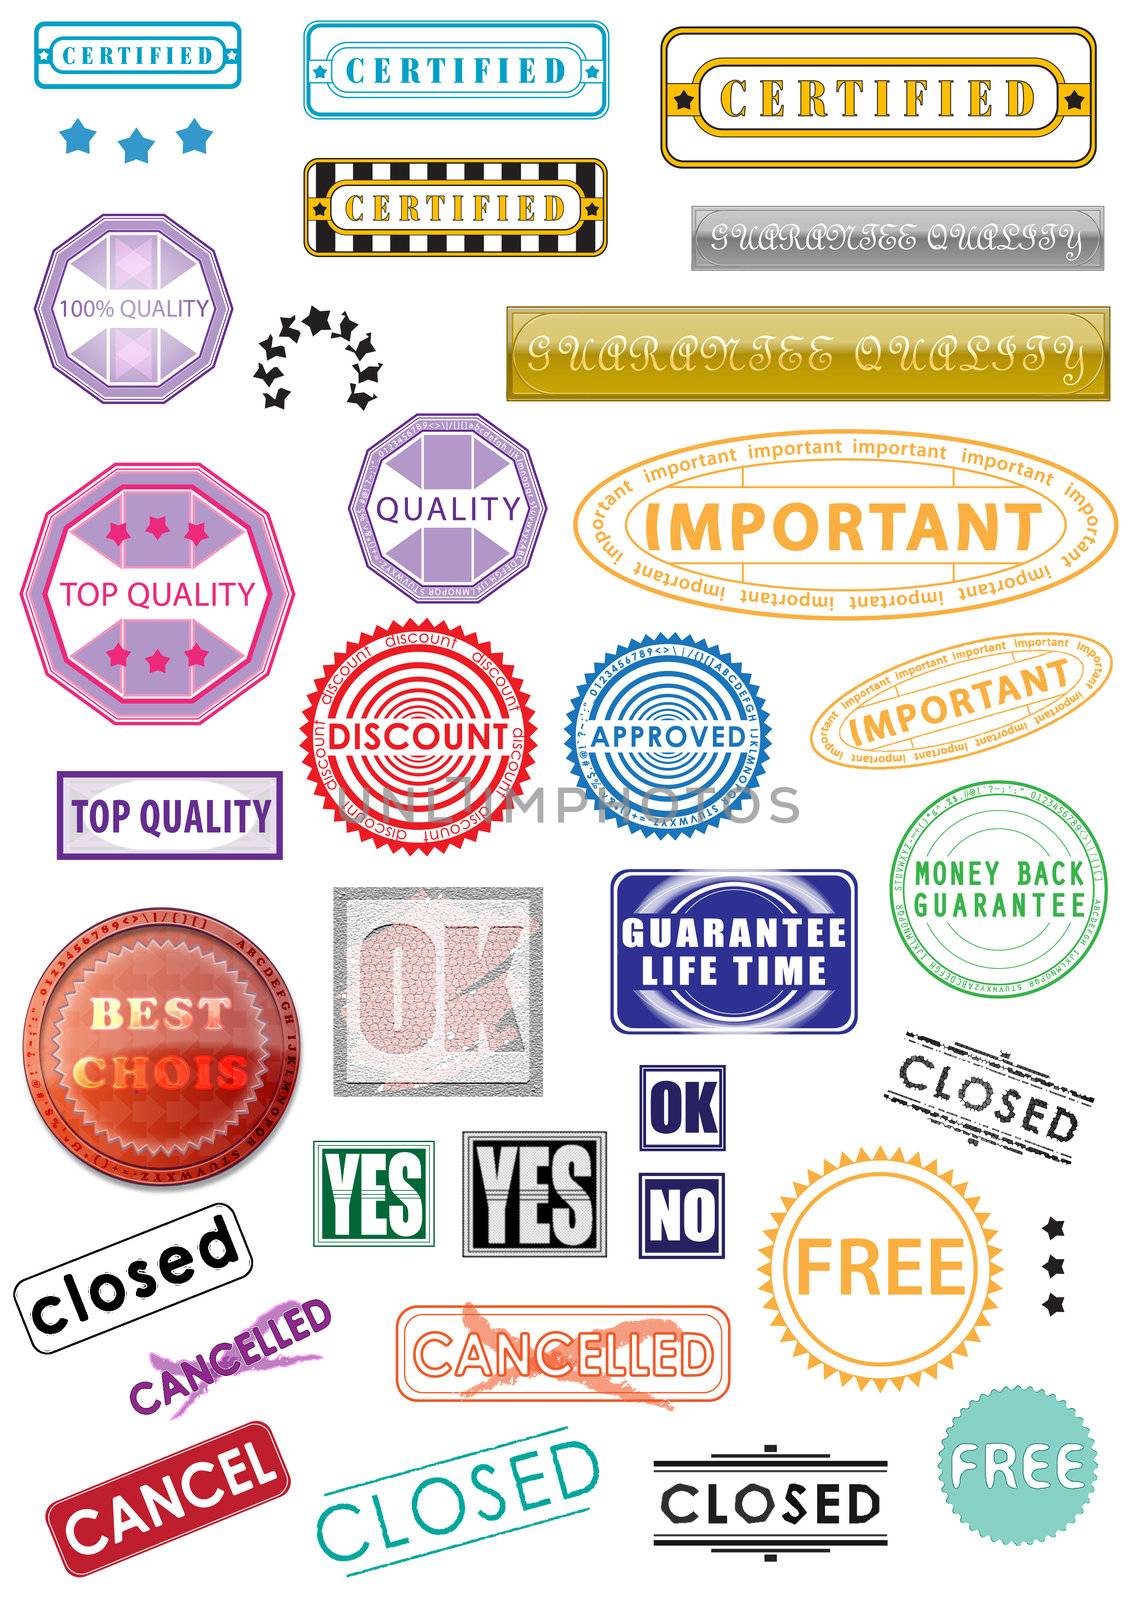 Rubber stamps, stickers, labels, signs and symbols clipart in vector
